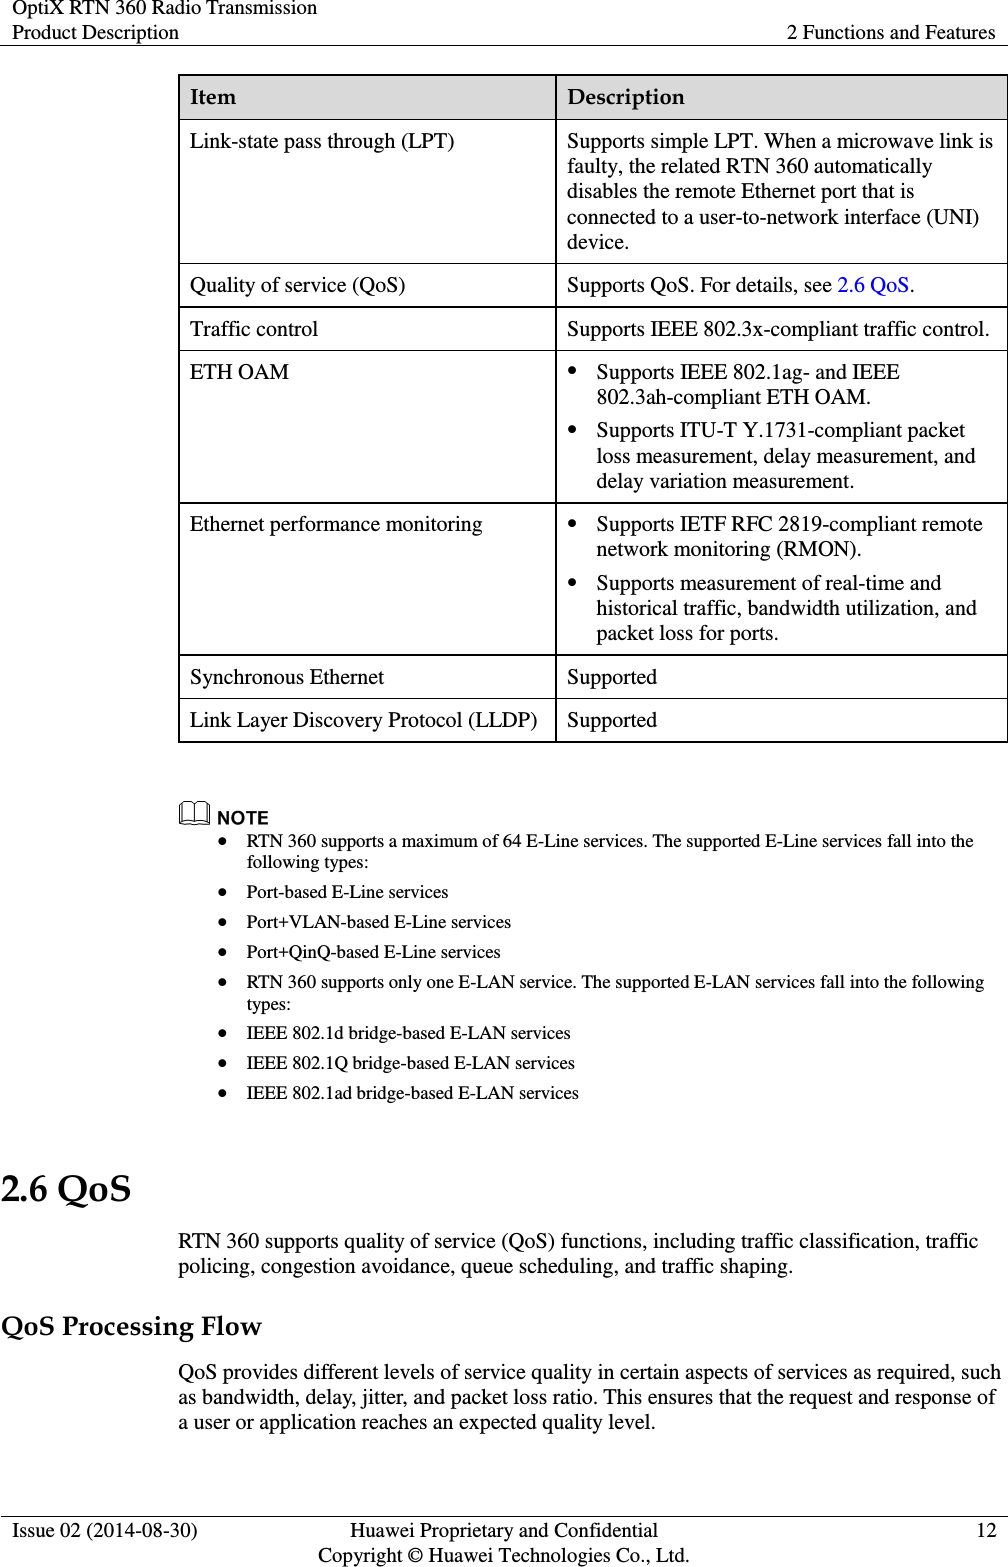 OptiX RTN 360 Radio Transmission Product Description 2 Functions and Features  Issue 02 (2014-08-30) Huawei Proprietary and Confidential                                     Copyright © Huawei Technologies Co., Ltd. 12  Item Description Link-state pass through (LPT) Supports simple LPT. When a microwave link is faulty, the related RTN 360 automatically disables the remote Ethernet port that is connected to a user-to-network interface (UNI) device. Quality of service (QoS) Supports QoS. For details, see 2.6 QoS. Traffic control Supports IEEE 802.3x-compliant traffic control. ETH OAM  Supports IEEE 802.1ag- and IEEE 802.3ah-compliant ETH OAM.    Supports ITU-T Y.1731-compliant packet loss measurement, delay measurement, and delay variation measurement. Ethernet performance monitoring  Supports IETF RFC 2819-compliant remote network monitoring (RMON).    Supports measurement of real-time and historical traffic, bandwidth utilization, and packet loss for ports.   Synchronous Ethernet Supported Link Layer Discovery Protocol (LLDP) Supported    RTN 360 supports a maximum of 64 E-Line services. The supported E-Line services fall into the following types:  Port-based E-Line services  Port+VLAN-based E-Line services  Port+QinQ-based E-Line services  RTN 360 supports only one E-LAN service. The supported E-LAN services fall into the following types:  IEEE 802.1d bridge-based E-LAN services  IEEE 802.1Q bridge-based E-LAN services  IEEE 802.1ad bridge-based E-LAN services 2.6 QoS RTN 360 supports quality of service (QoS) functions, including traffic classification, traffic policing, congestion avoidance, queue scheduling, and traffic shaping. QoS Processing Flow QoS provides different levels of service quality in certain aspects of services as required, such as bandwidth, delay, jitter, and packet loss ratio. This ensures that the request and response of a user or application reaches an expected quality level. 